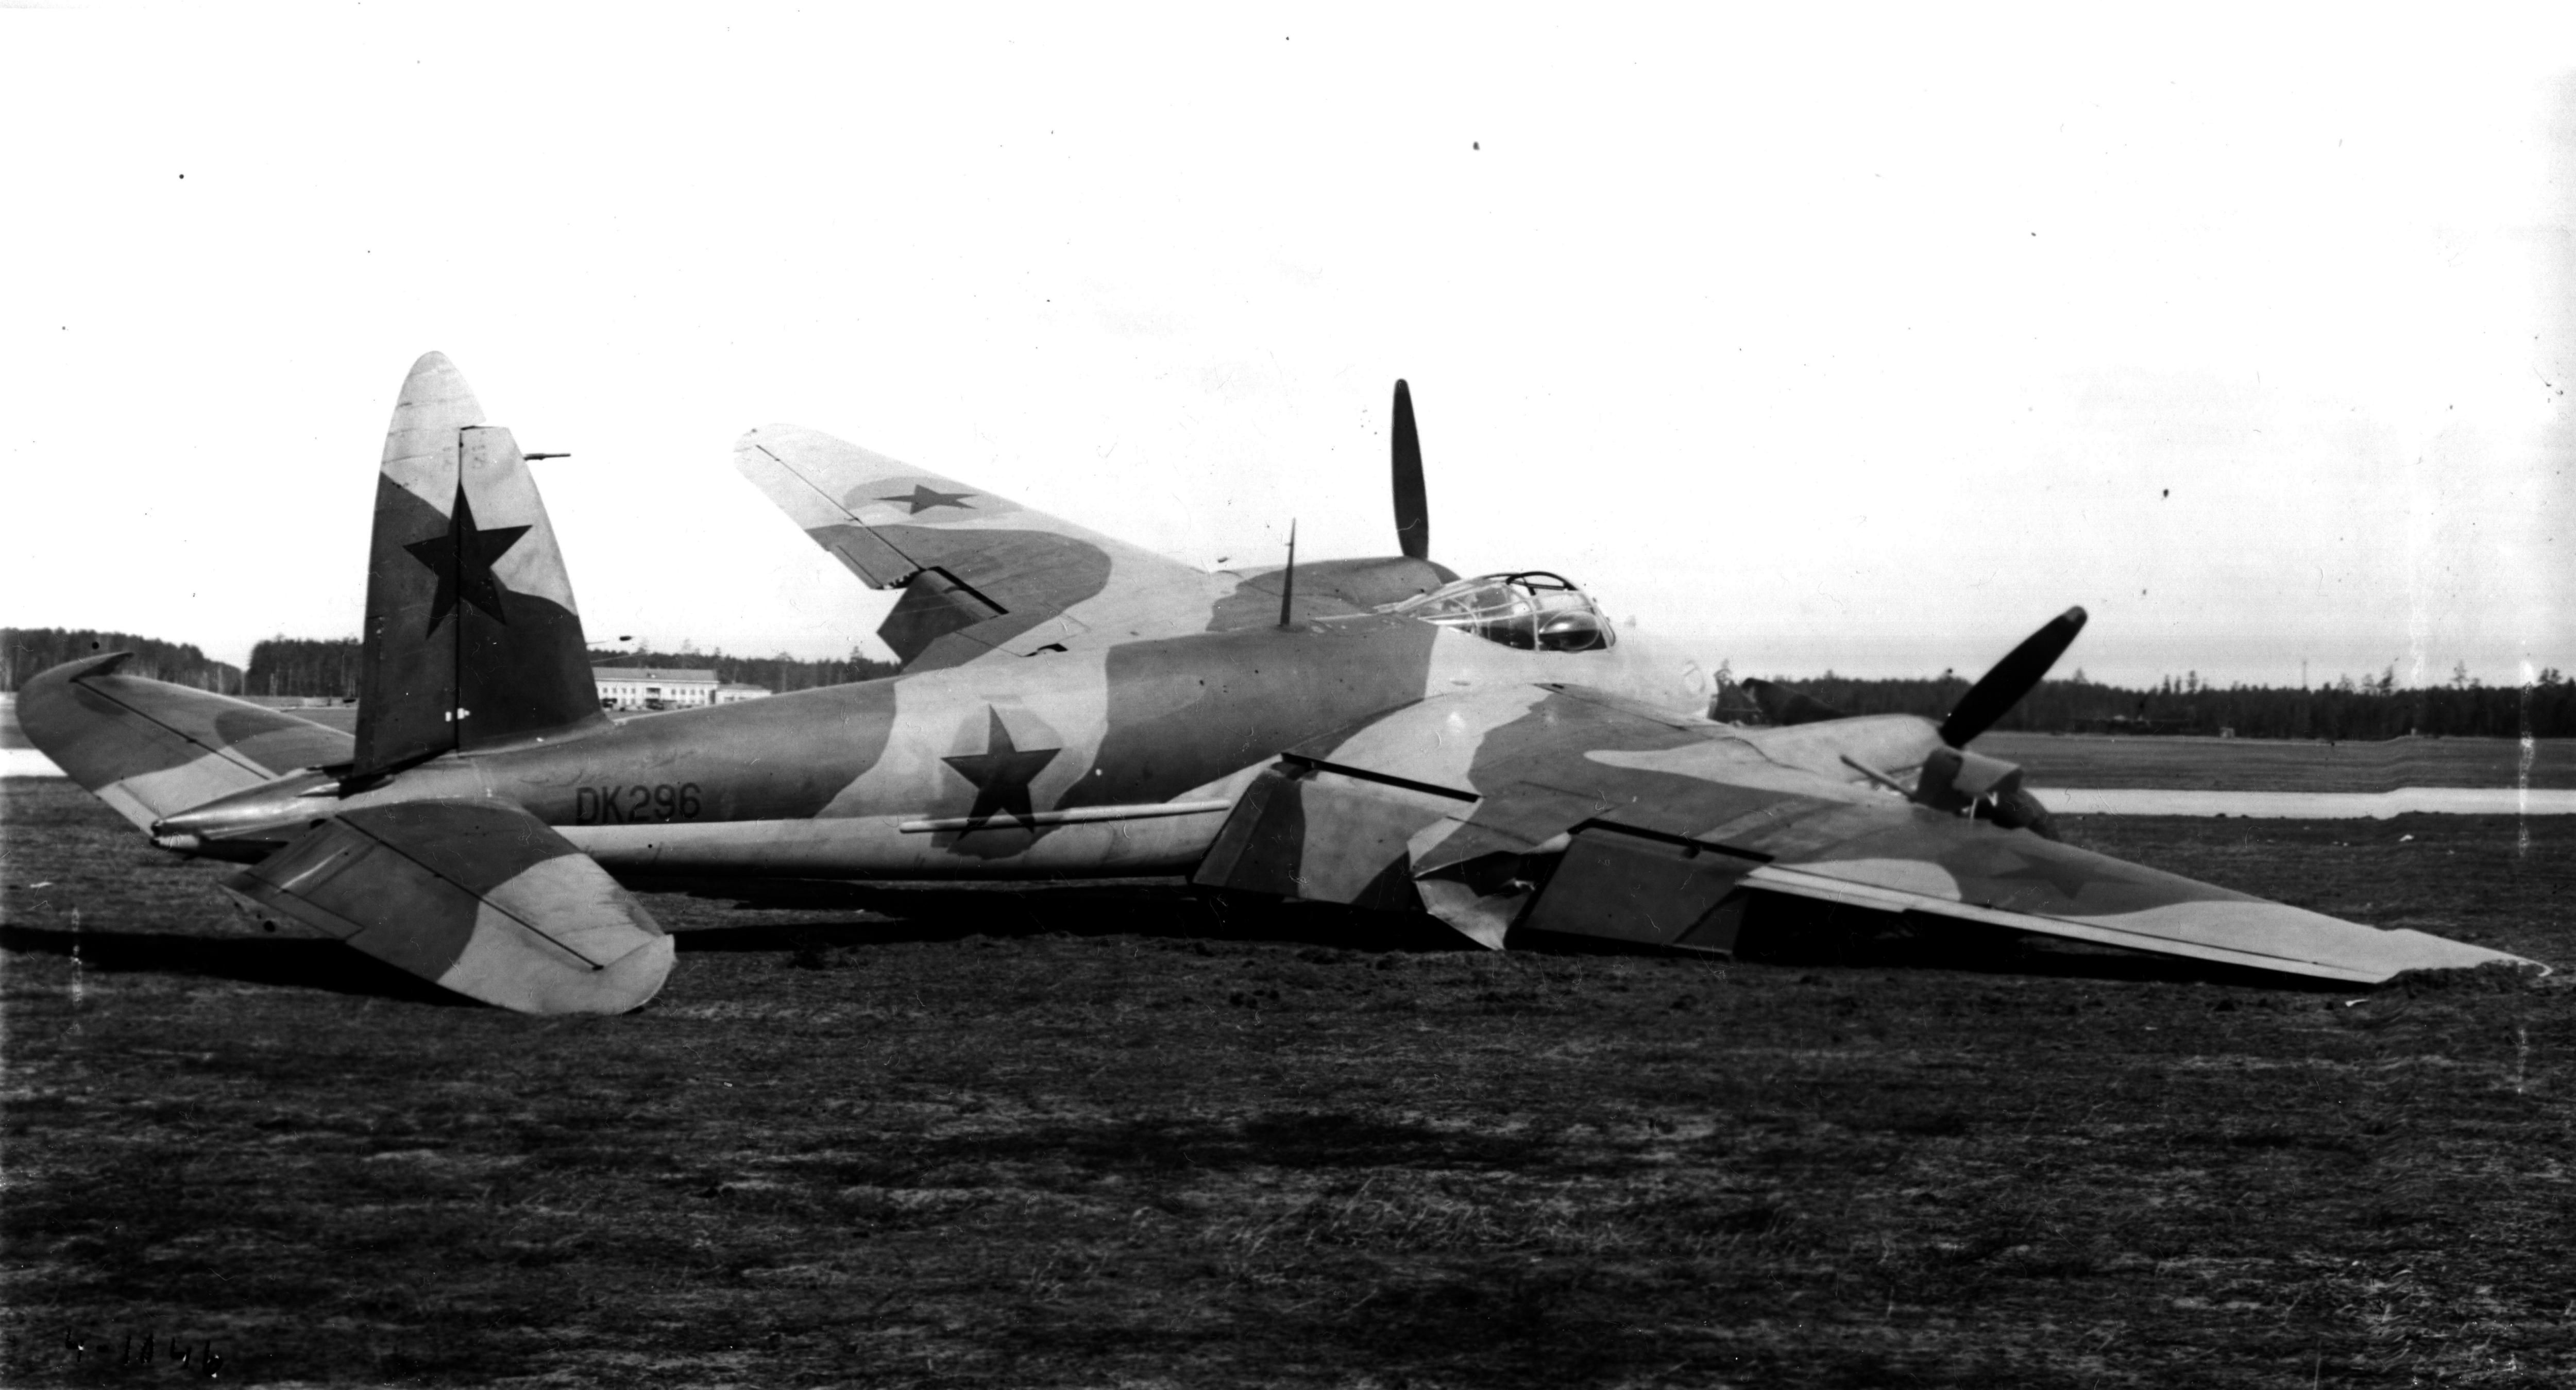 Mosquito_Mk_IV_DK296_at_the_Soviet_research_institute_on_15th_May_1944